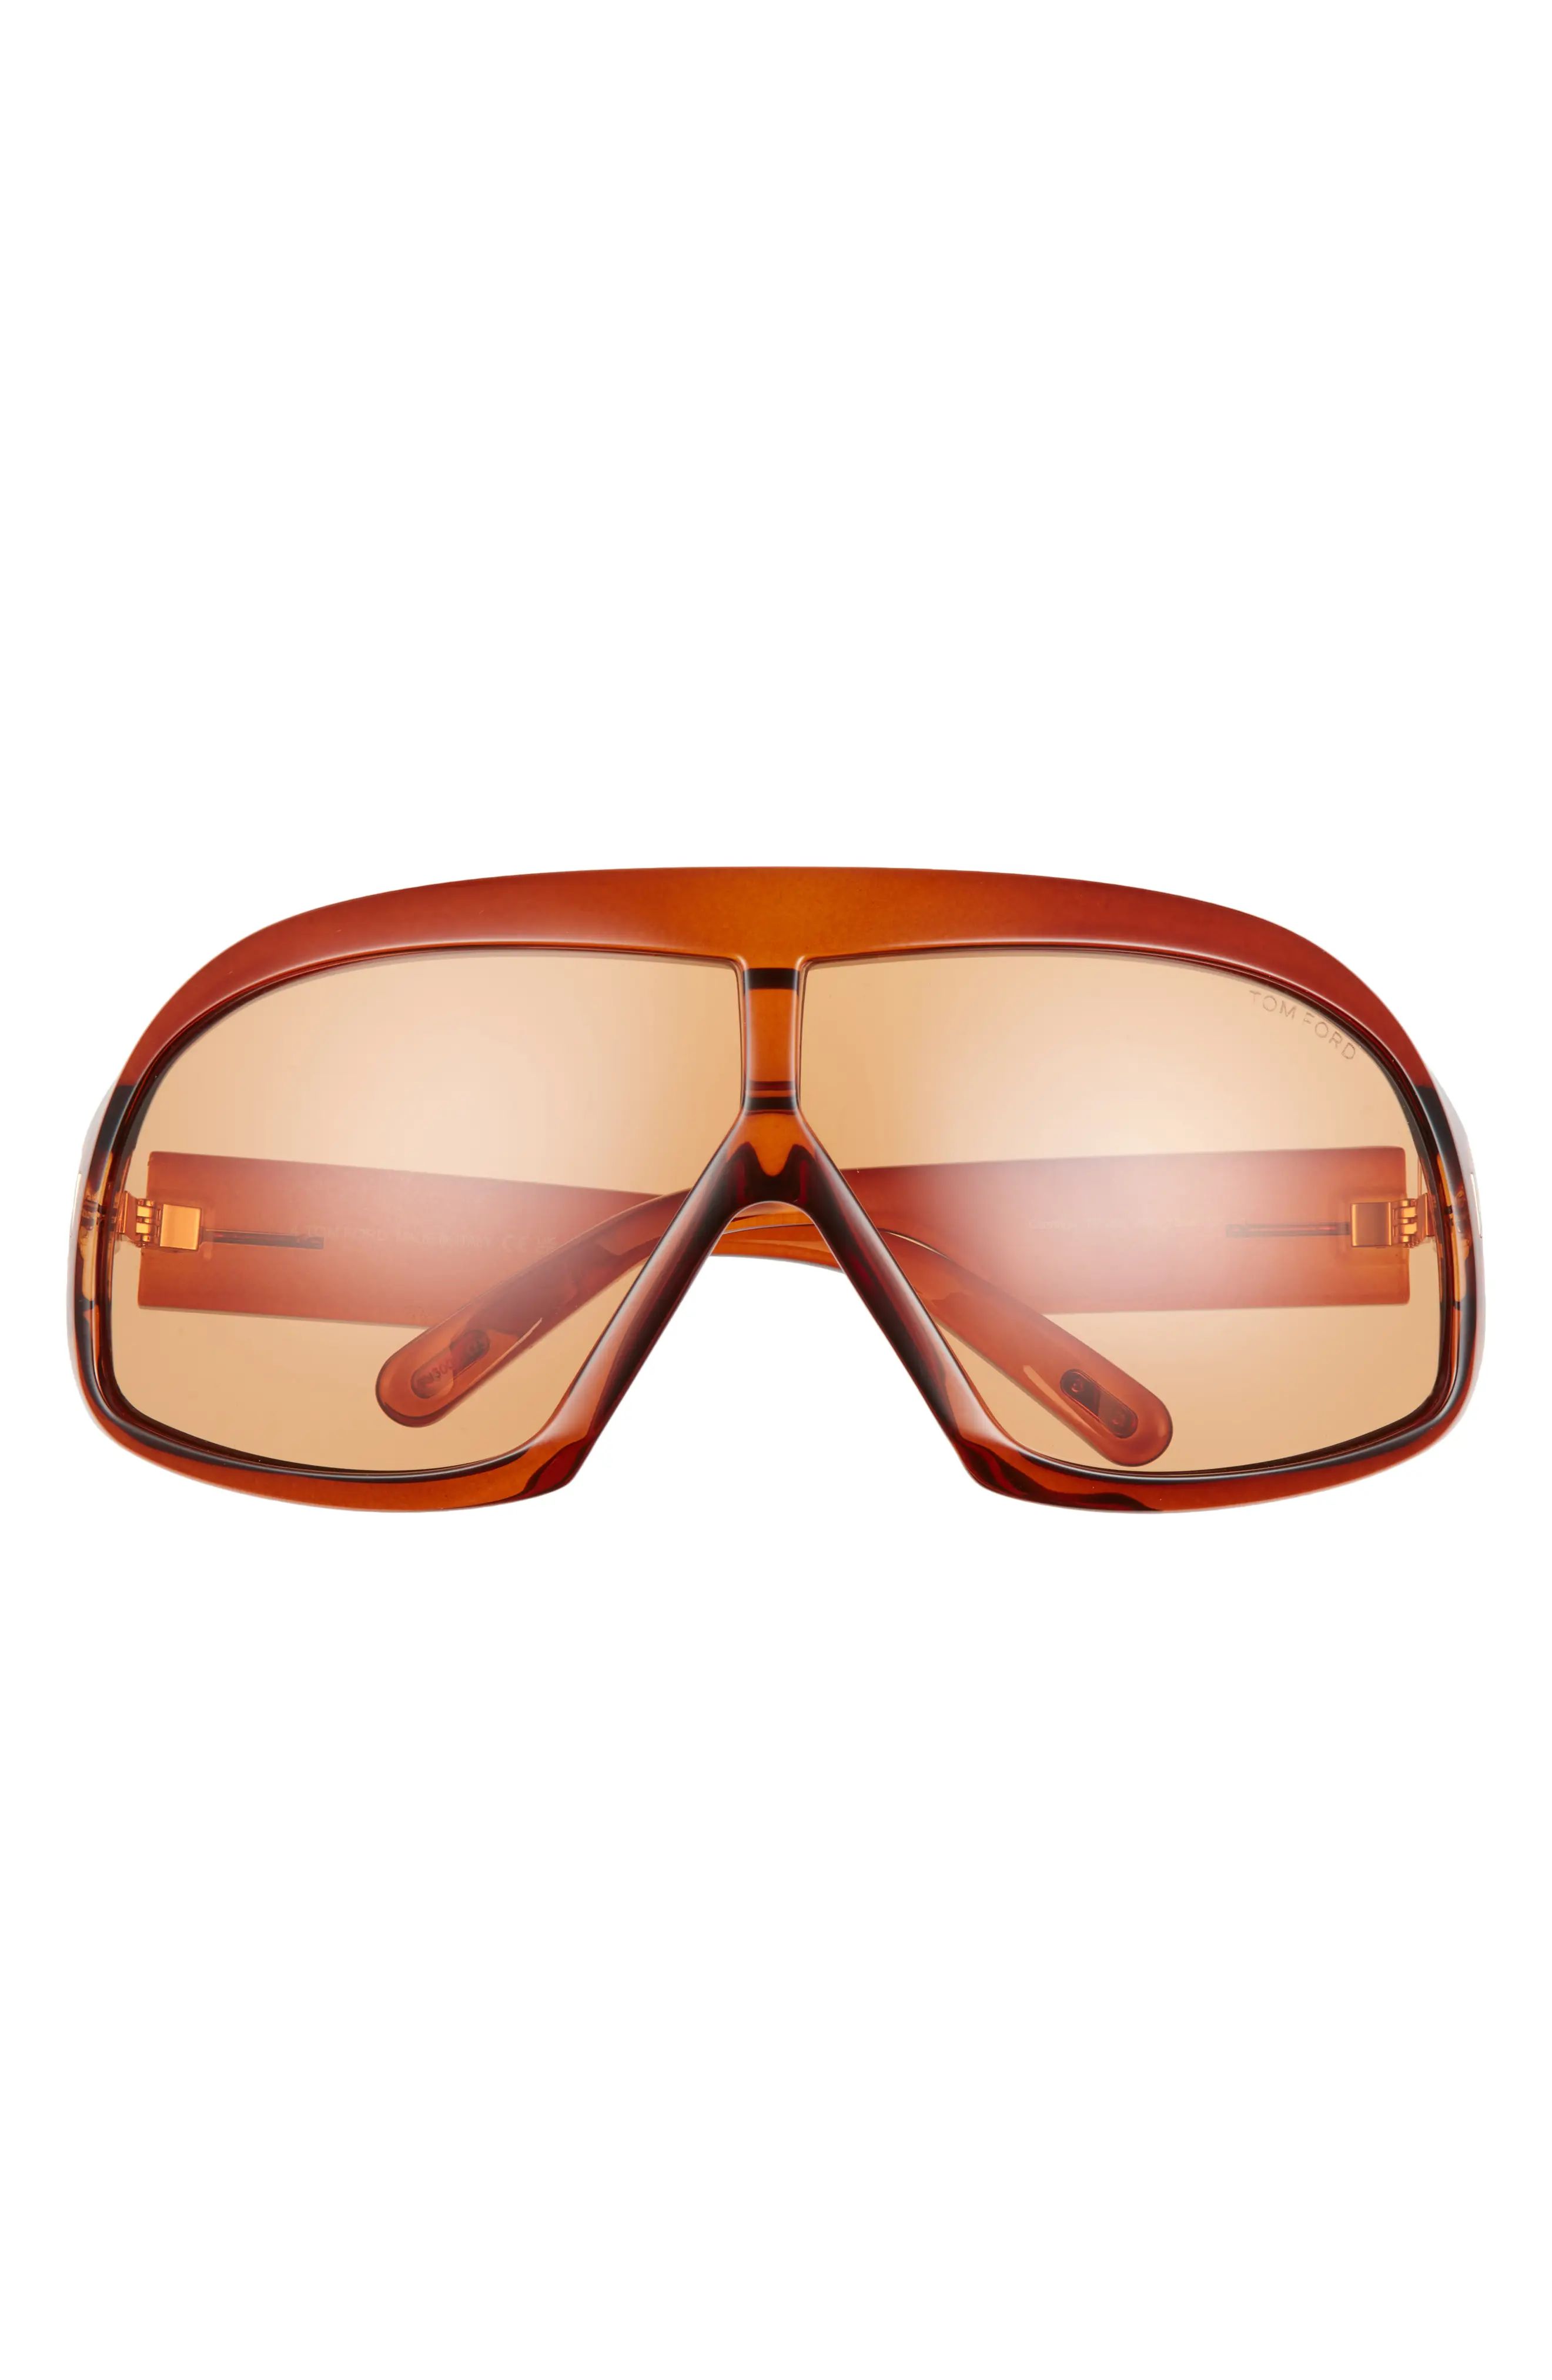 Tom Ford 78mm Aviator Sunglasses in Ilght Bronw/Brown at Nordstrom | Nordstrom